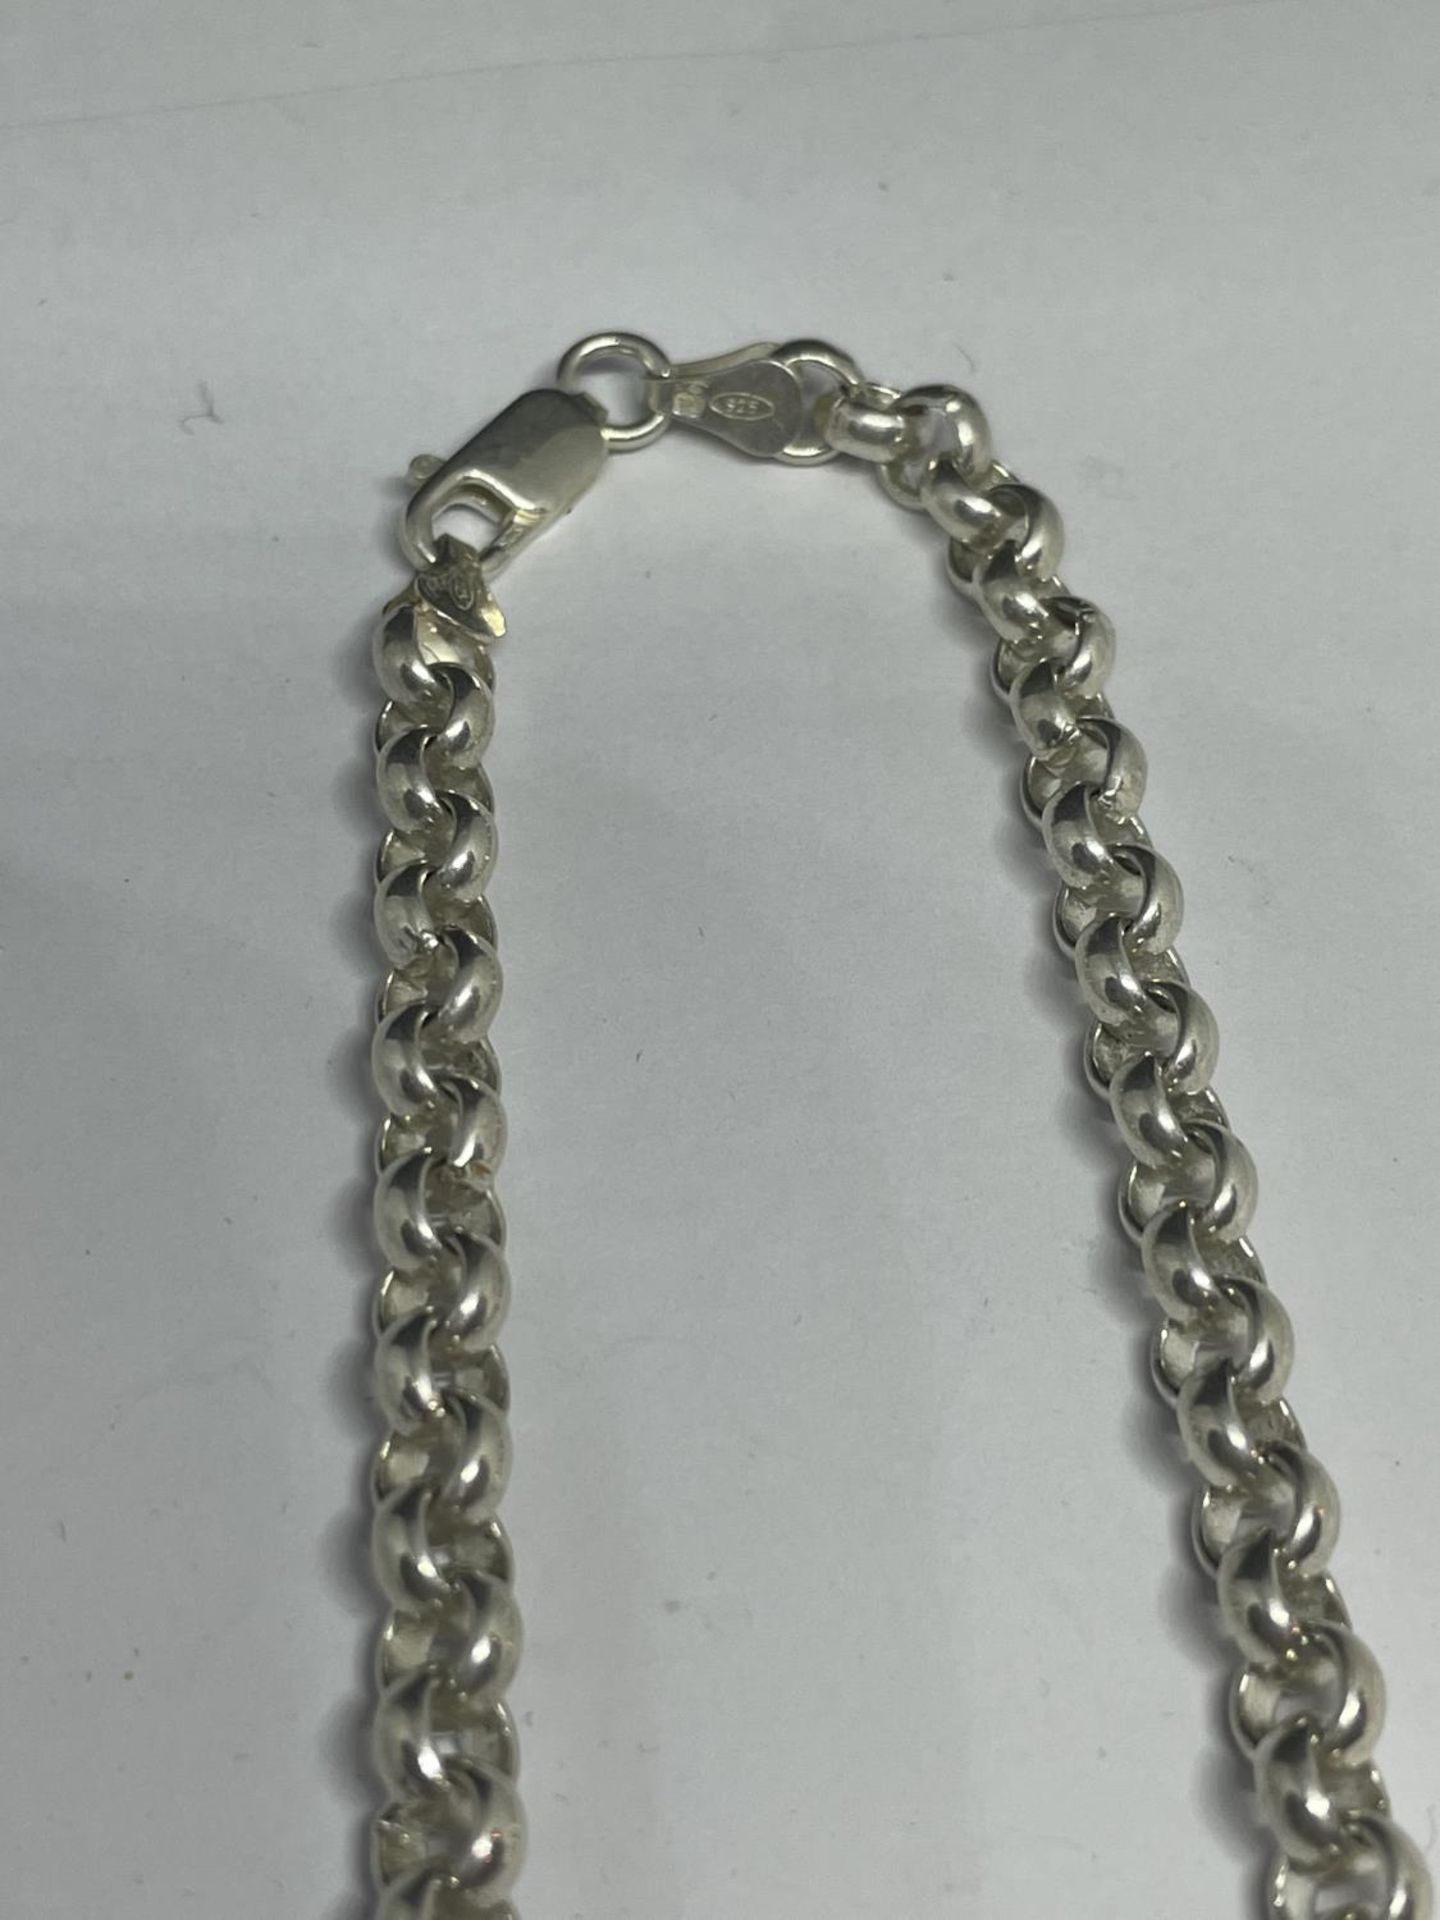 A HEAVY MARKED SILVER BELCHER NECKLACE LENGTH 18 INCHES - Image 3 of 3